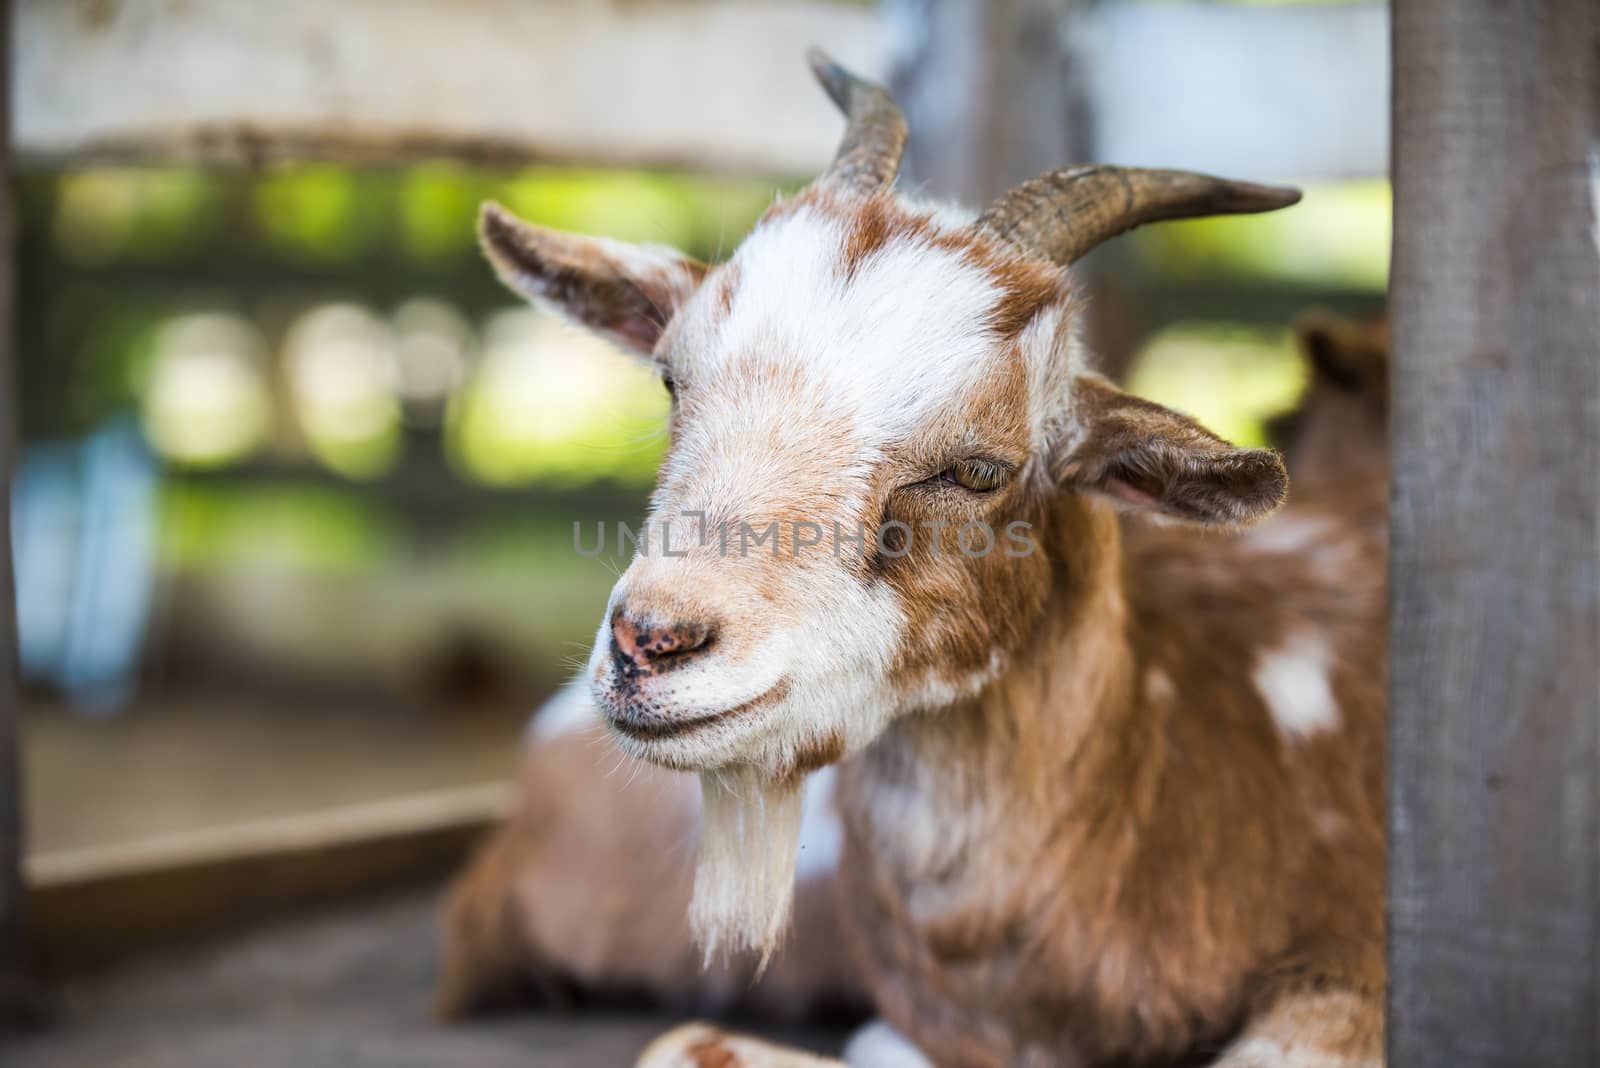 Mother Goat resting outside on a farm. Goat with horns portrait.